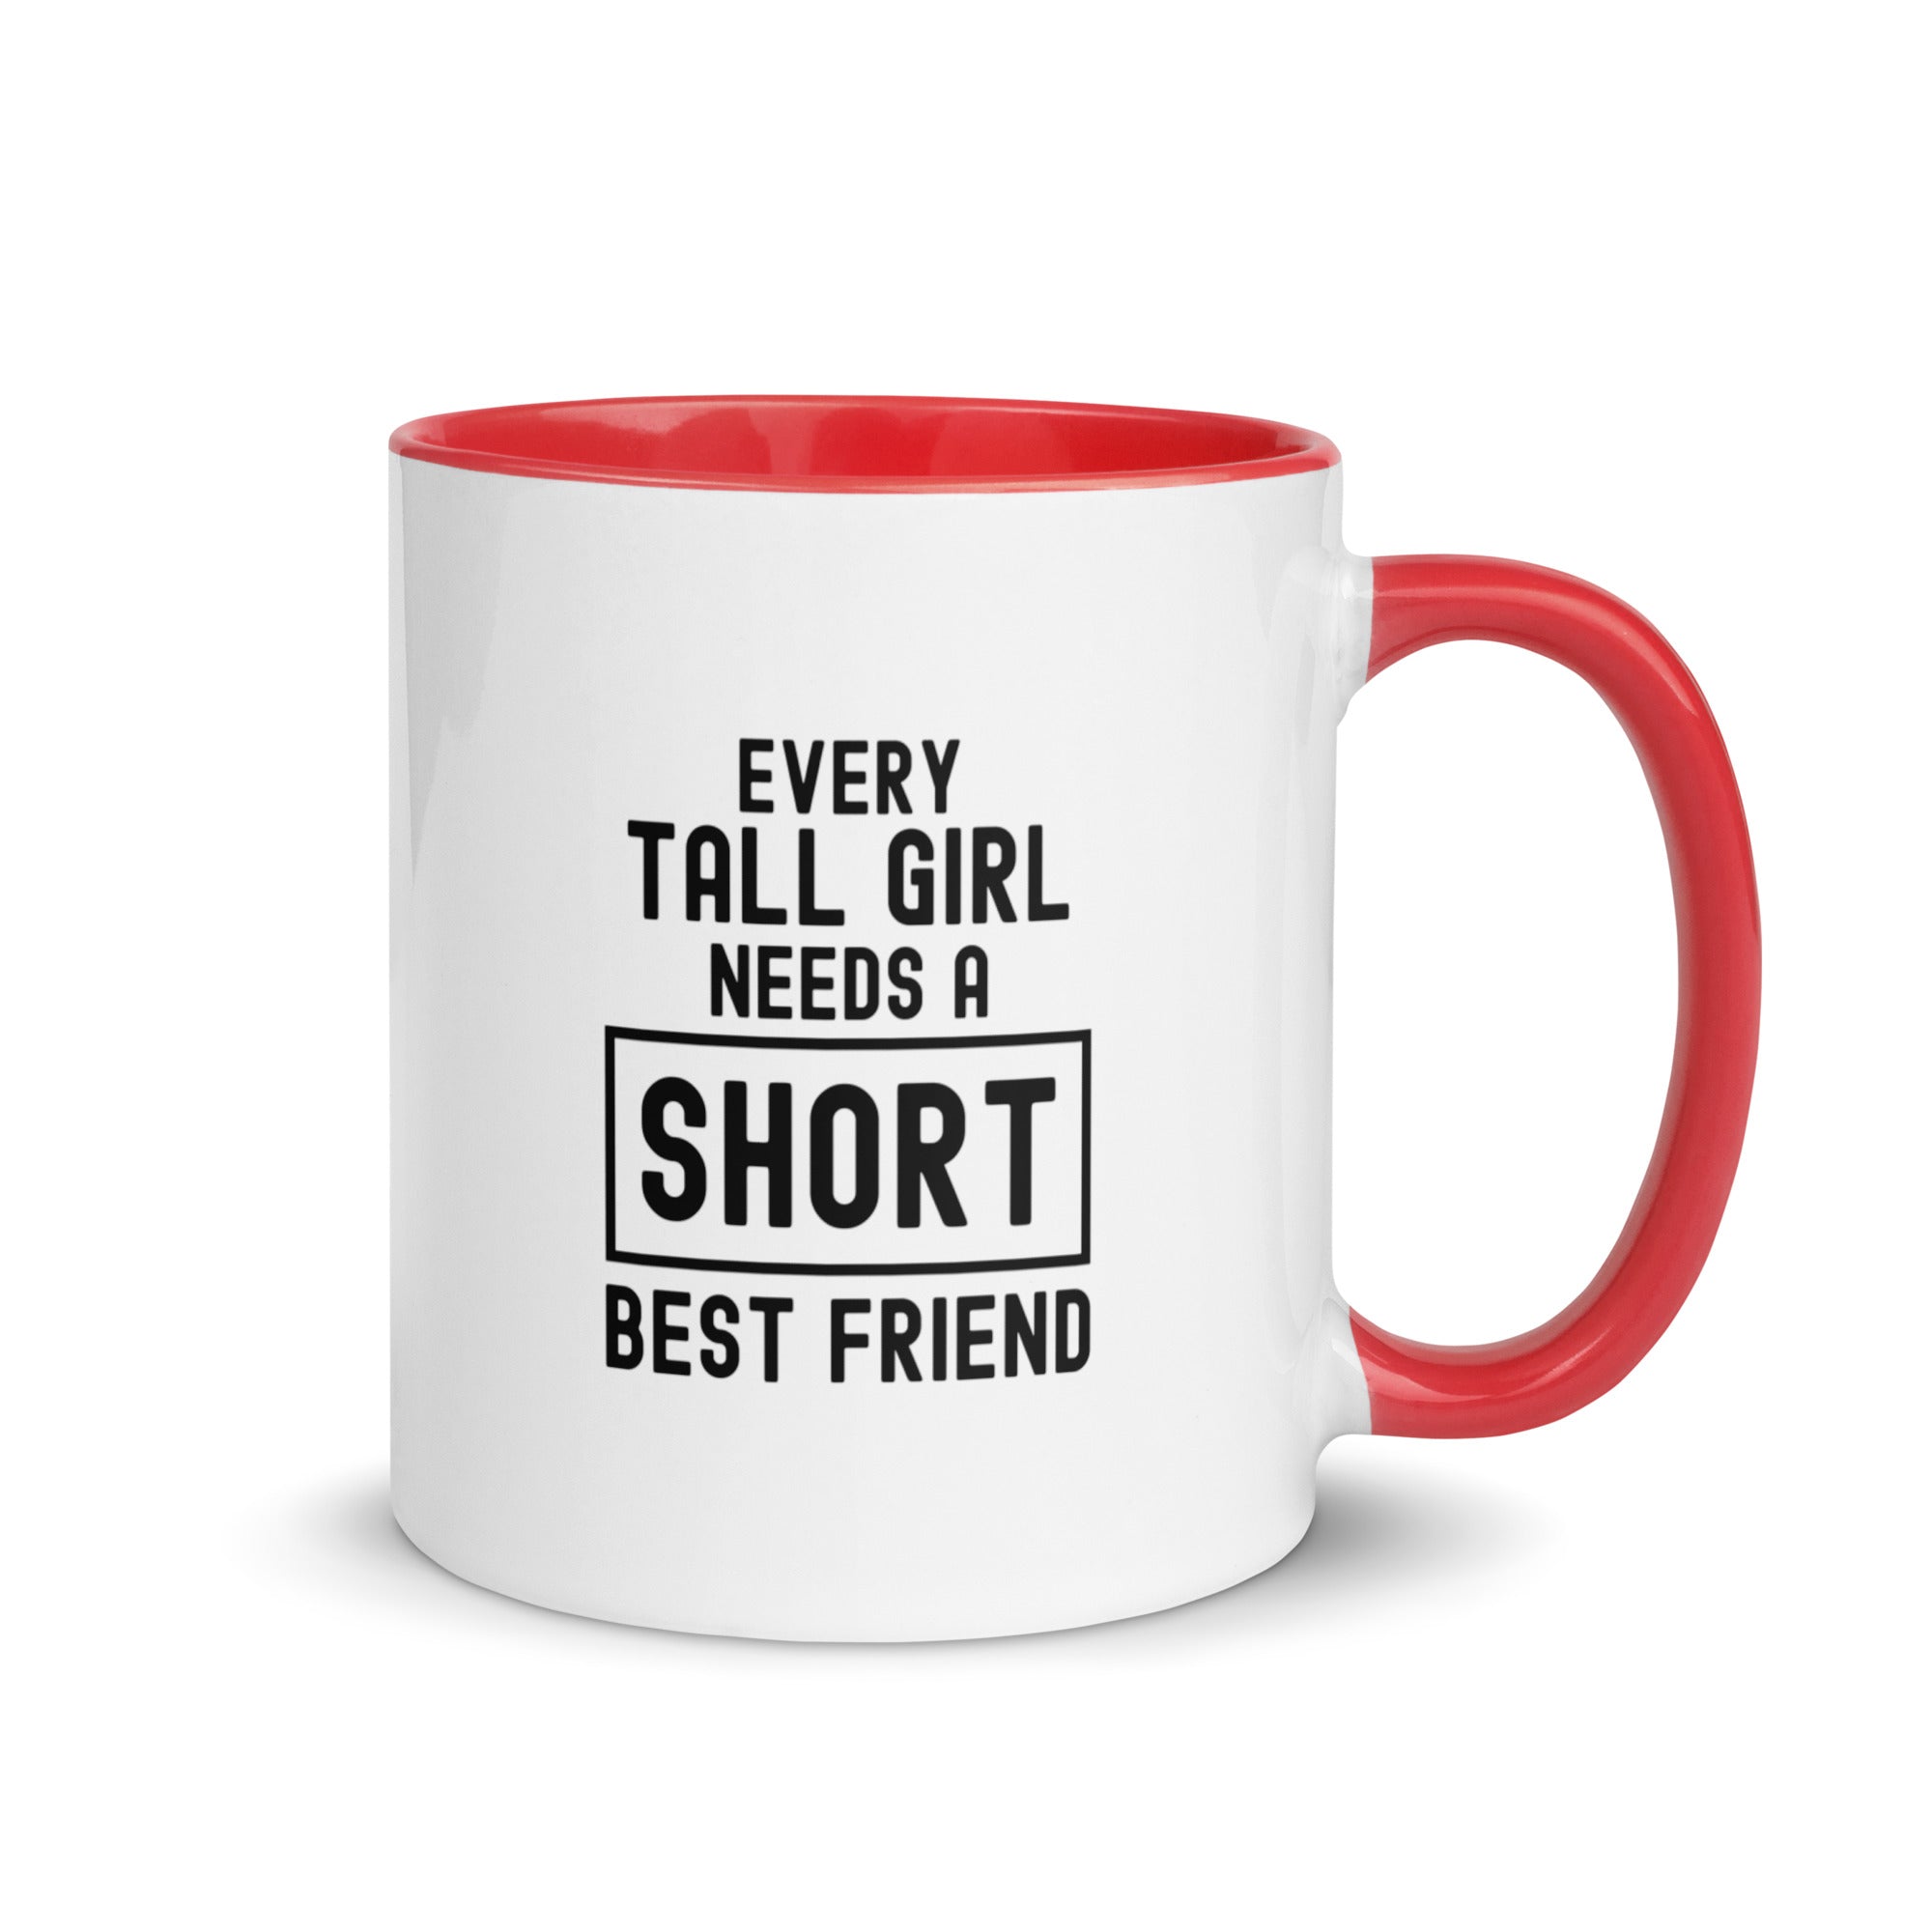 Mug with Color Inside | Every tall girl needs a short best friend